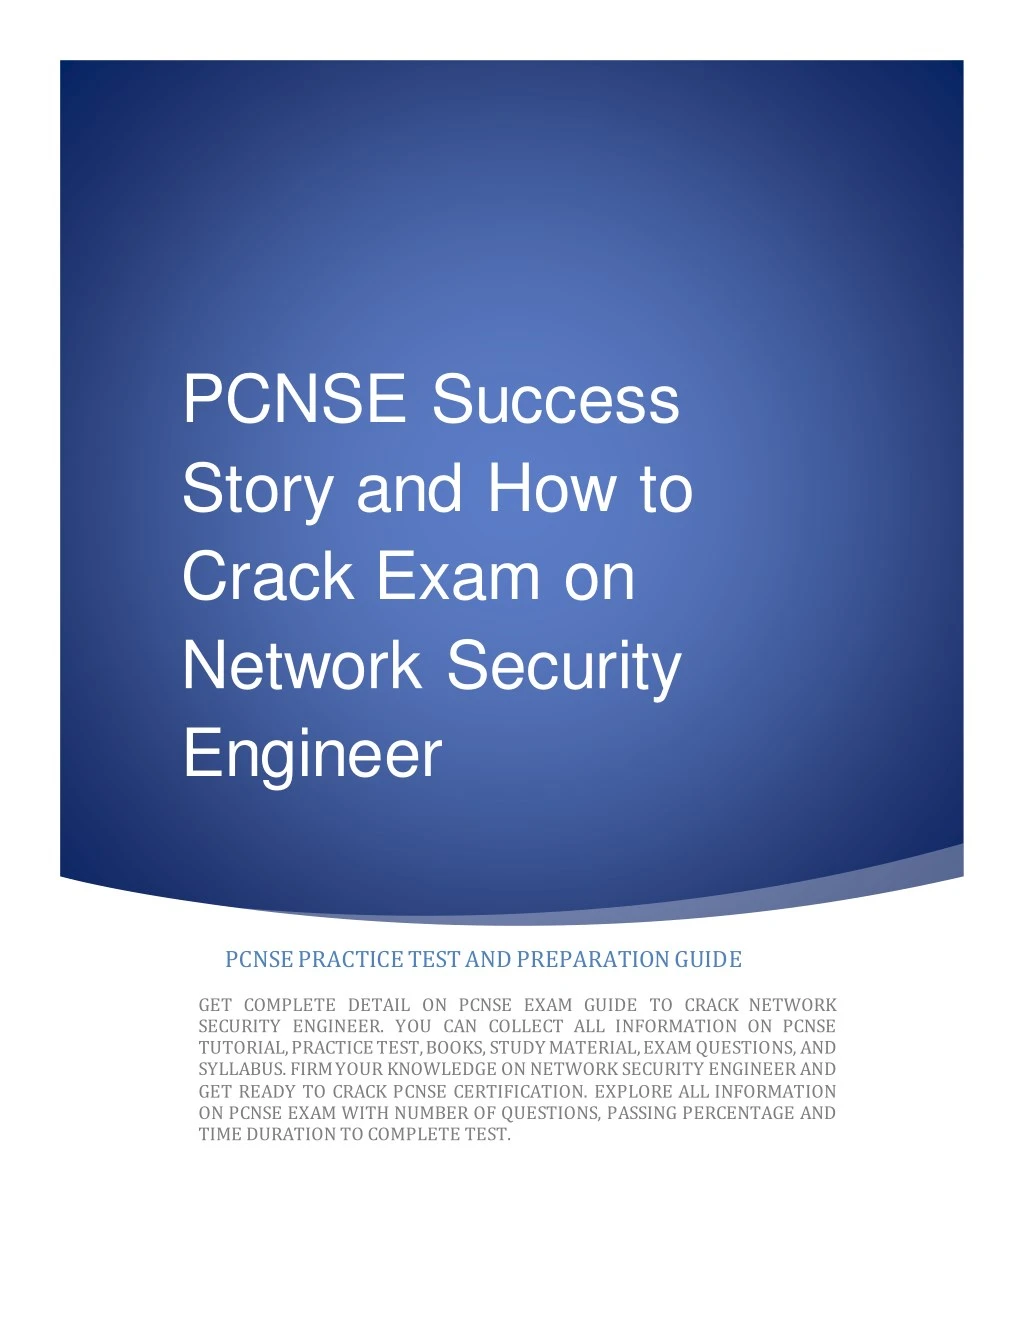 pcnse success story and how to crack exam